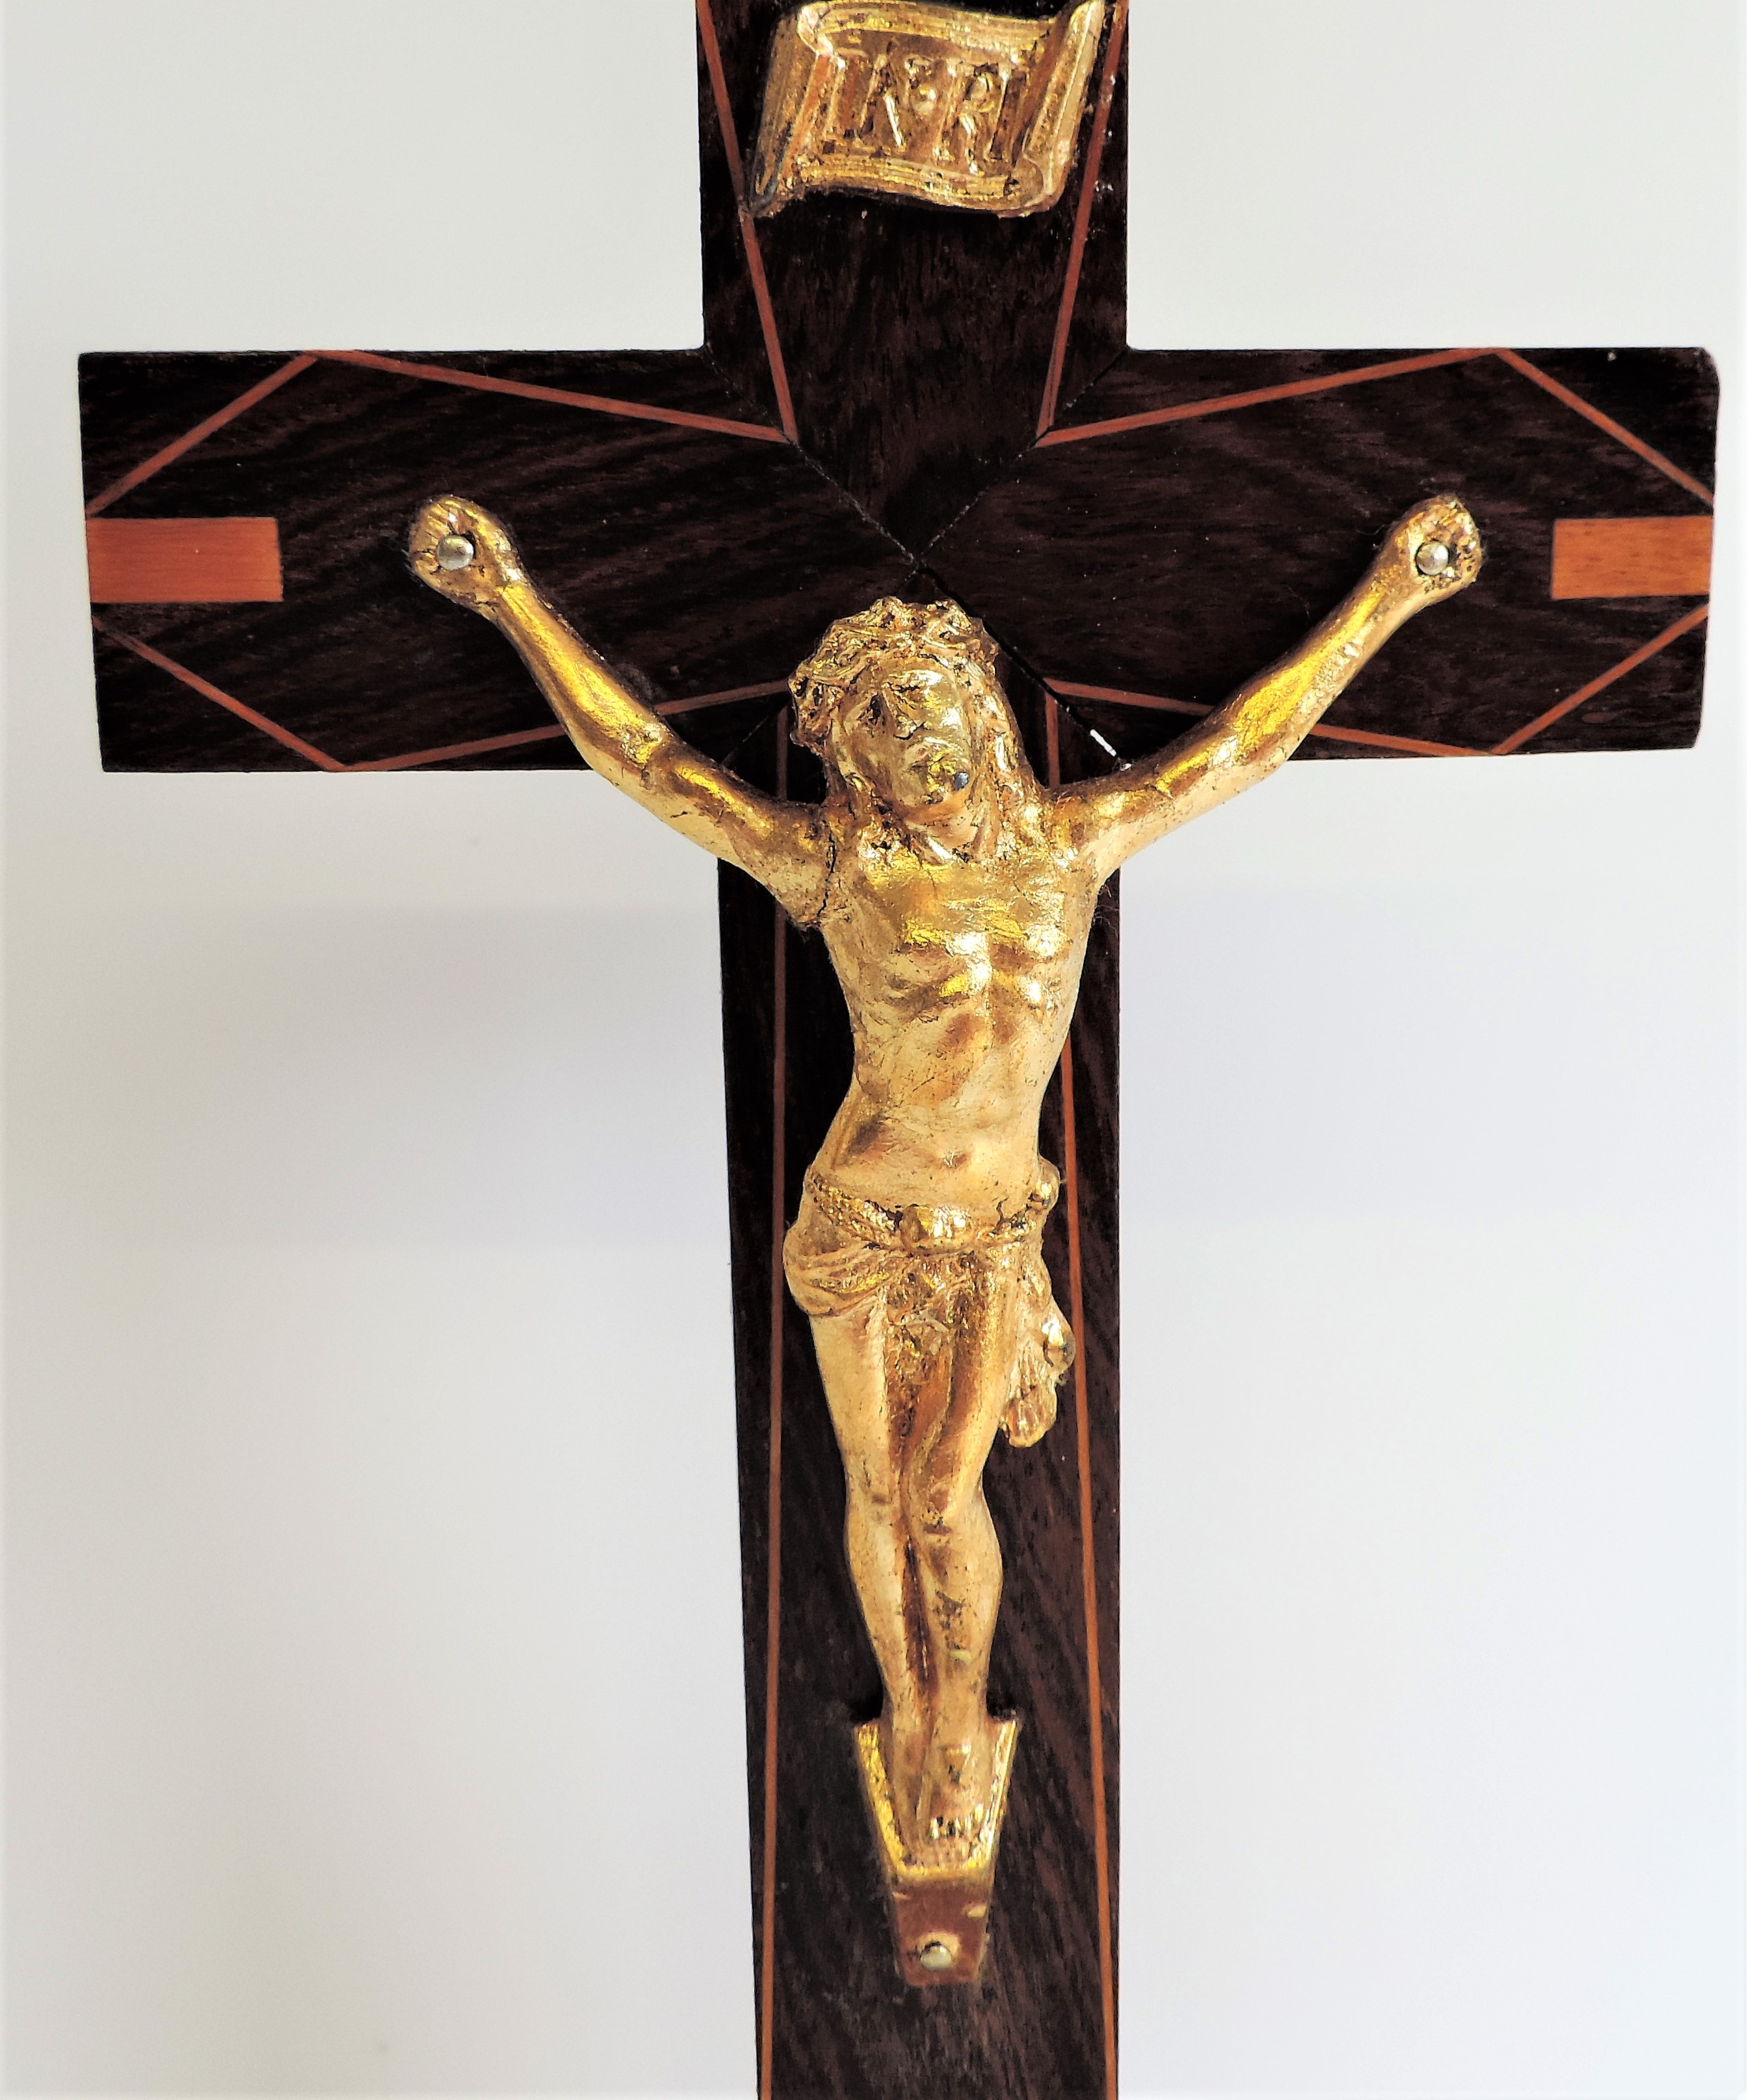 Antique French Wood & Gilt Crucifix. A fine quality inlaid wood cross with gilt Corpus Christi. - Image 3 of 4